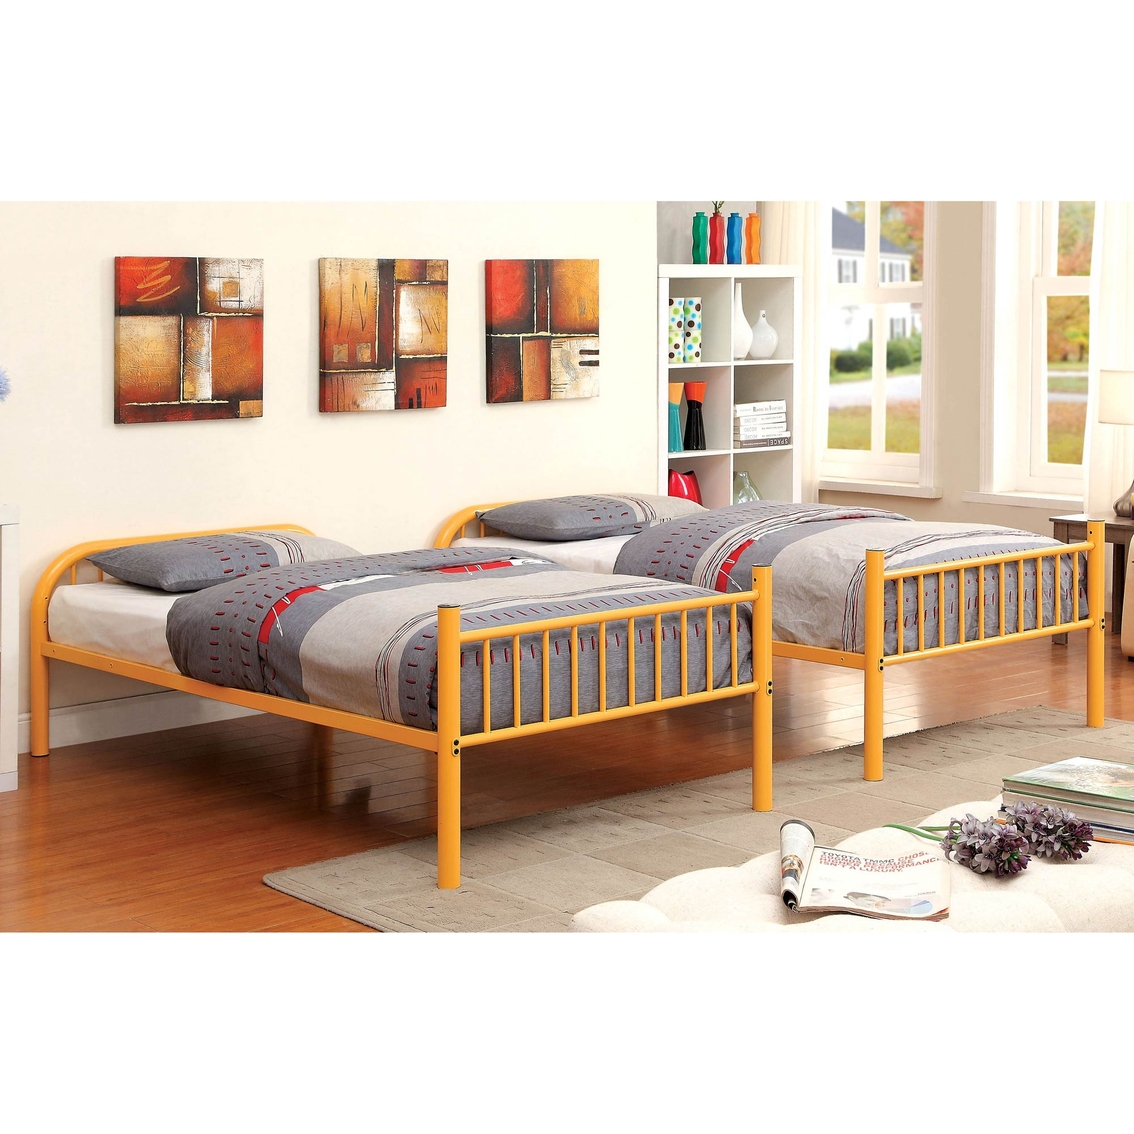 Furniture of America Rainbow Twin Bunk Bed - Image 2 of 2